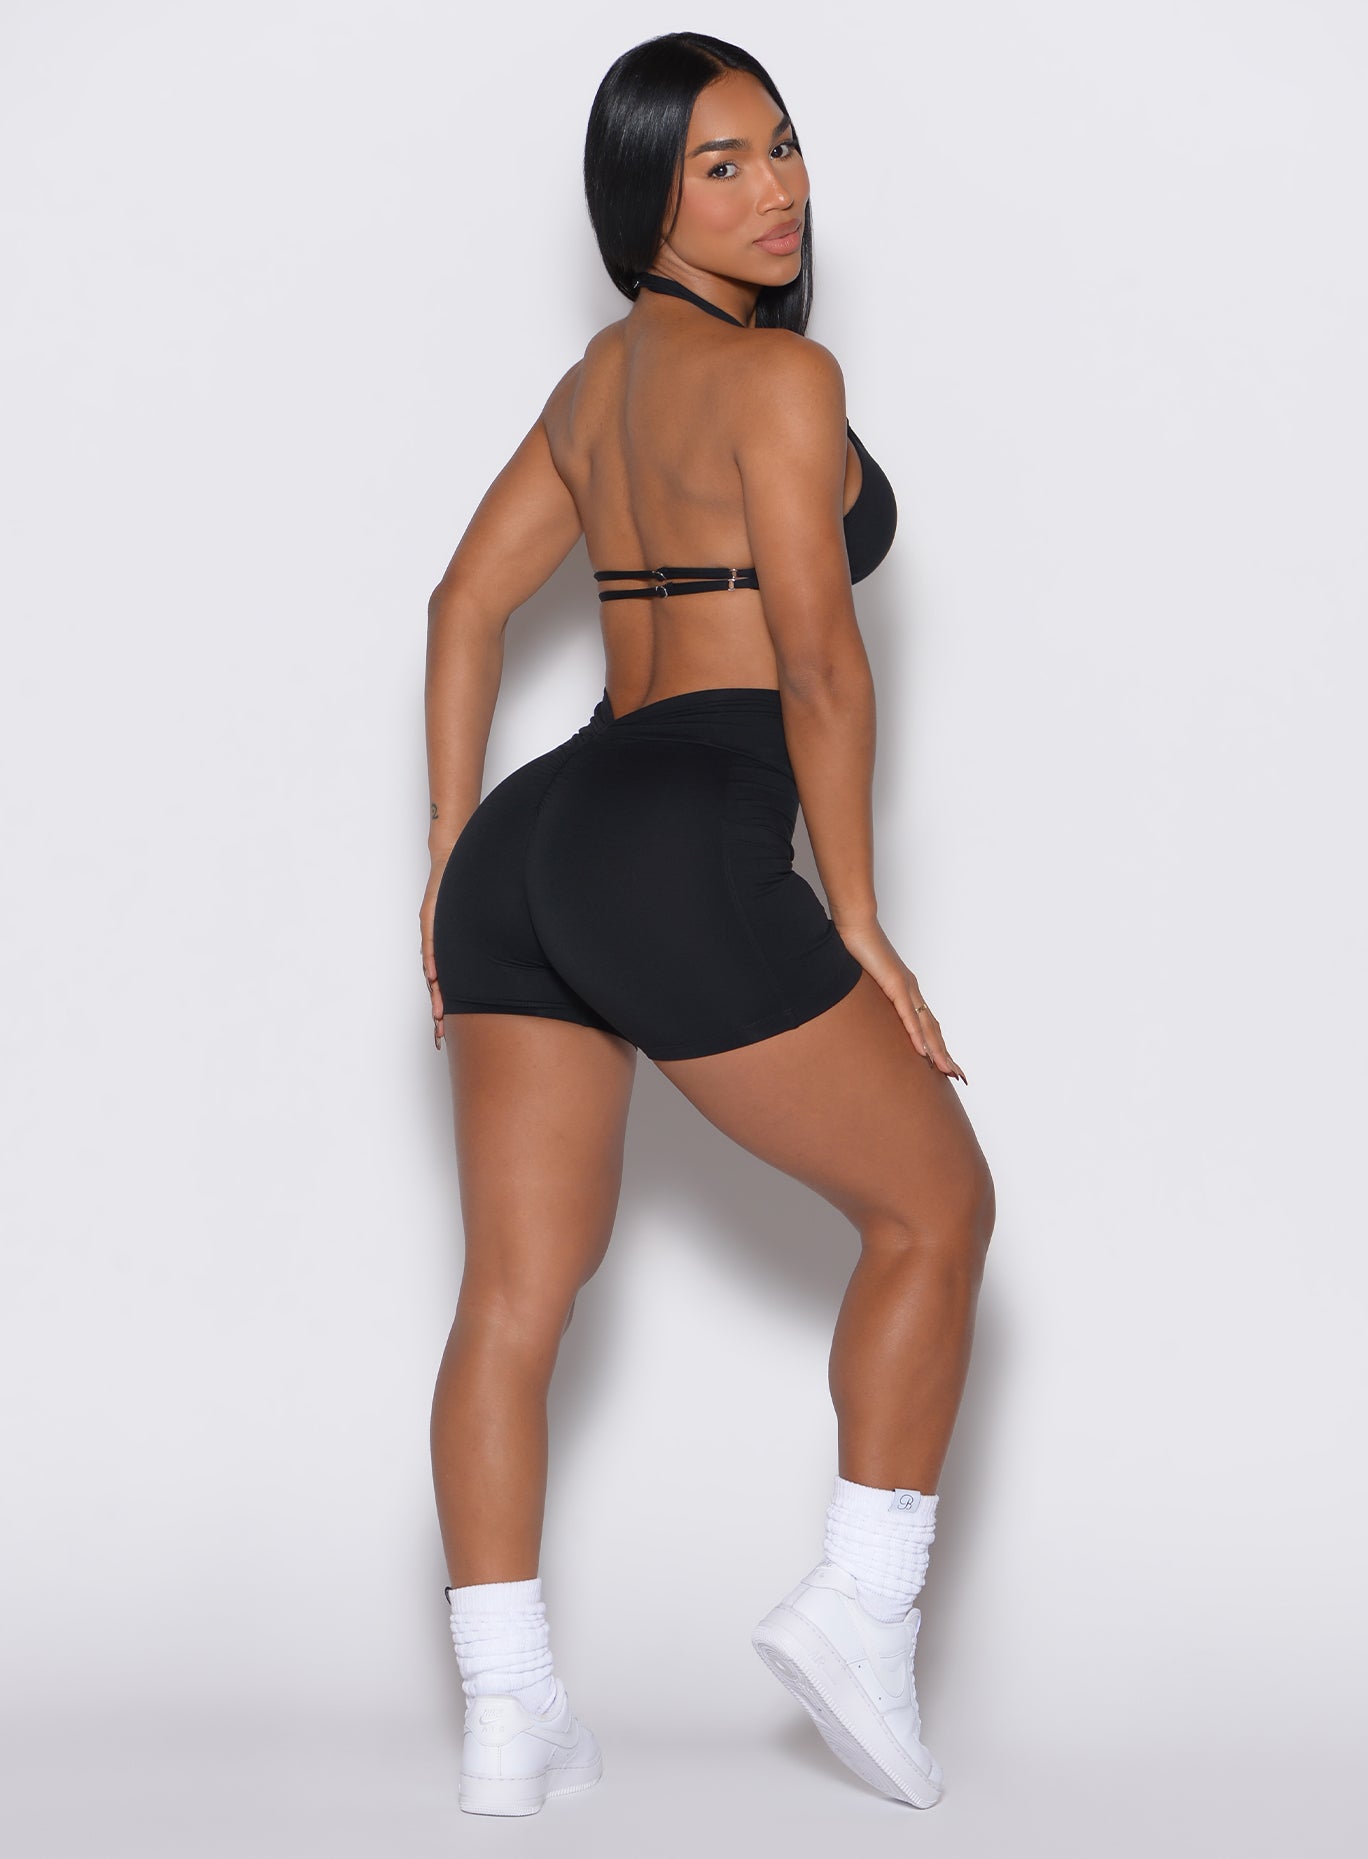 right side profile view of a model wearing our black V back shorts along with the matching sports bra